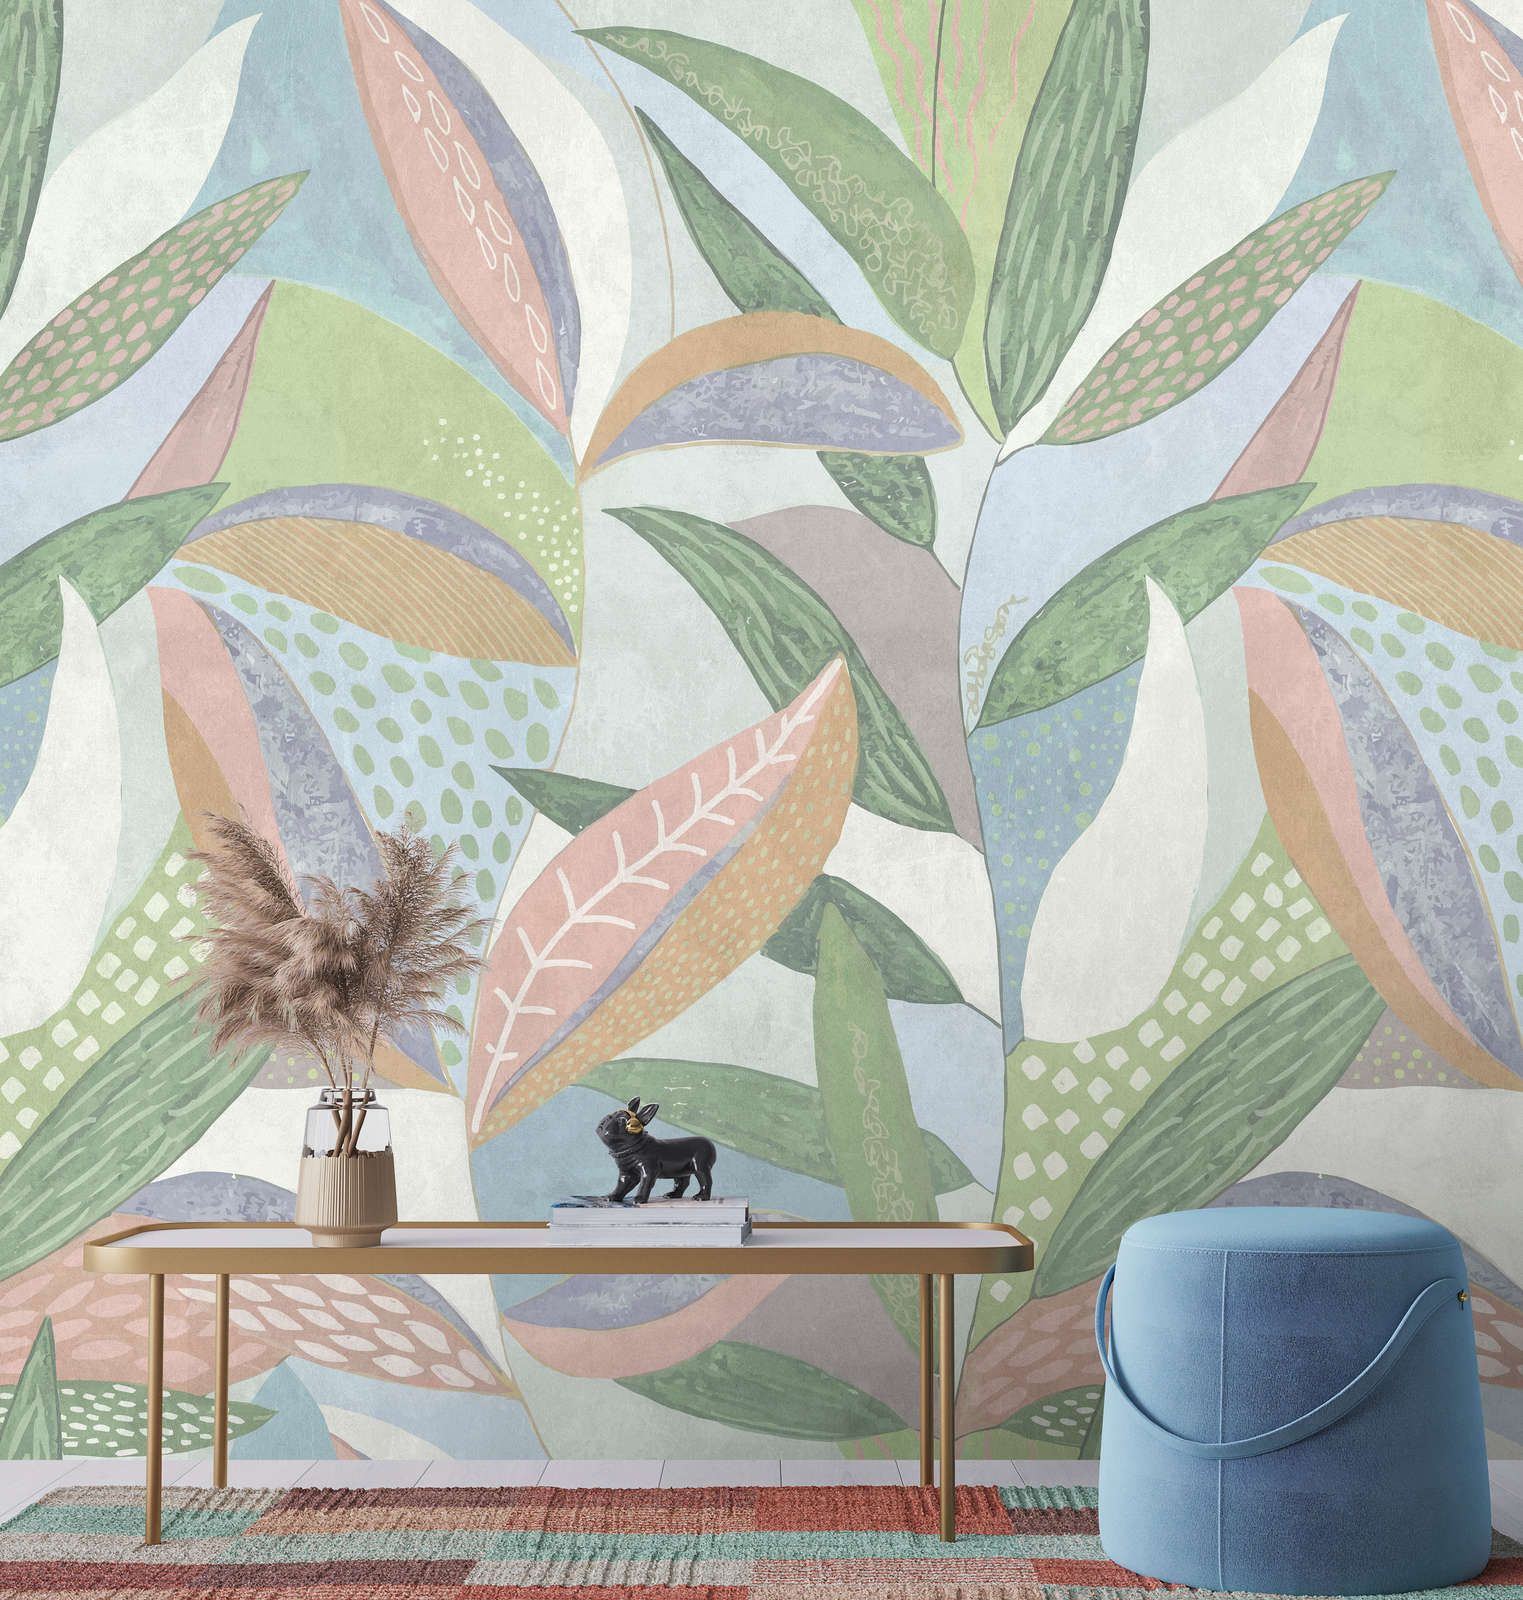             Photo wallpaper »emilia« - Colourful pastel leaf pattern in front of concrete plaster structure - green, blue, pink | Smooth, slightly shiny premium non-woven fabric
        